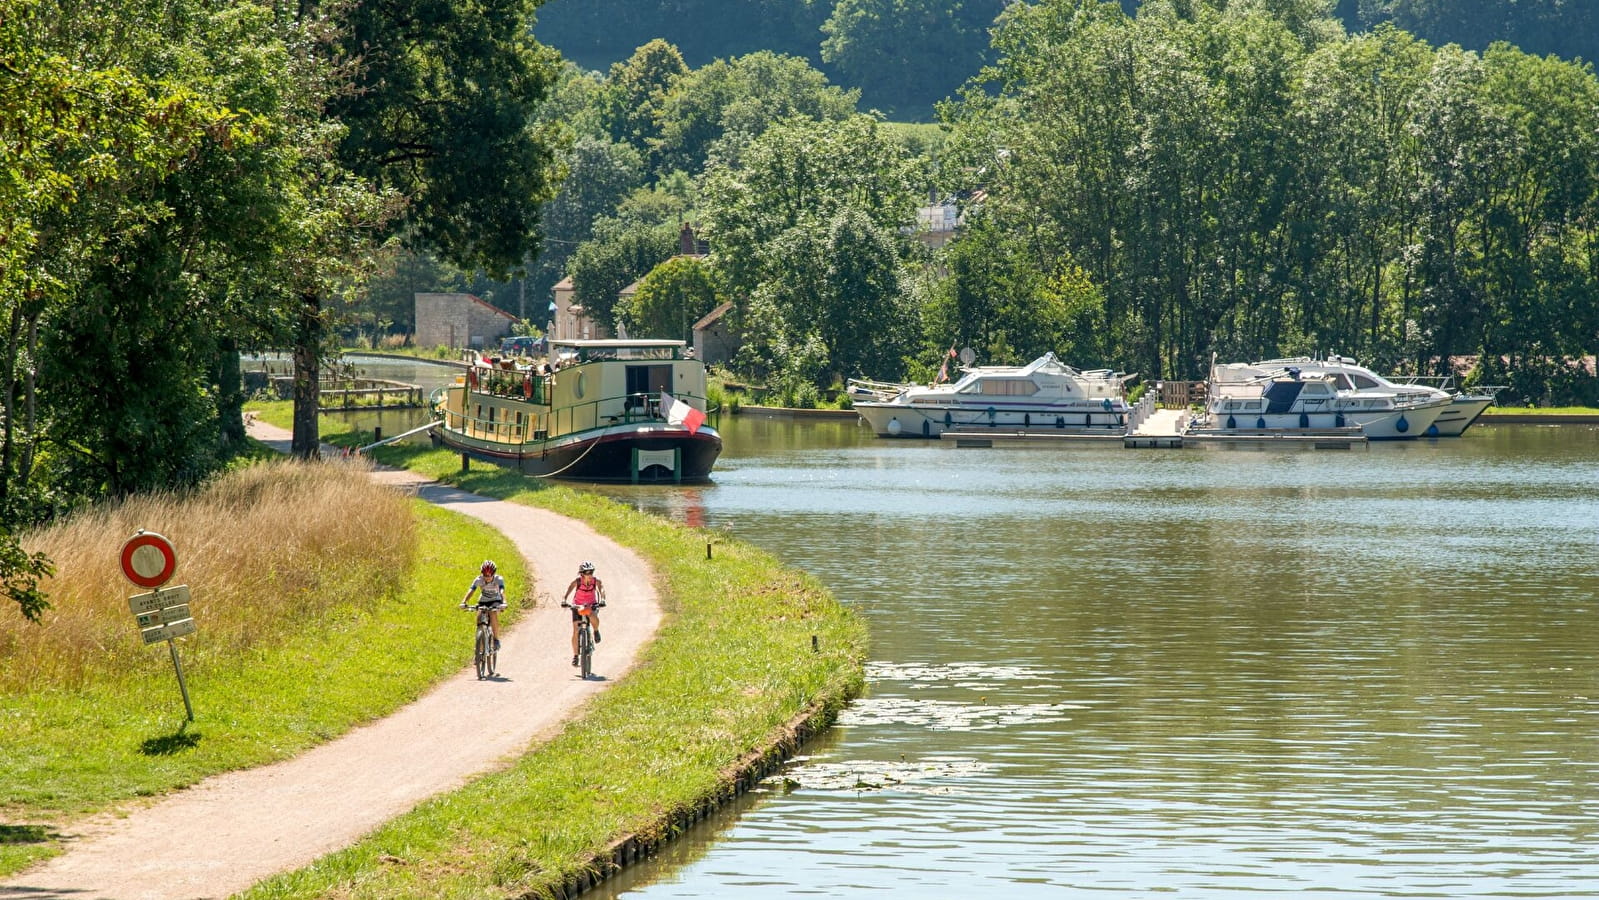 The Tour of Burgundy by bike